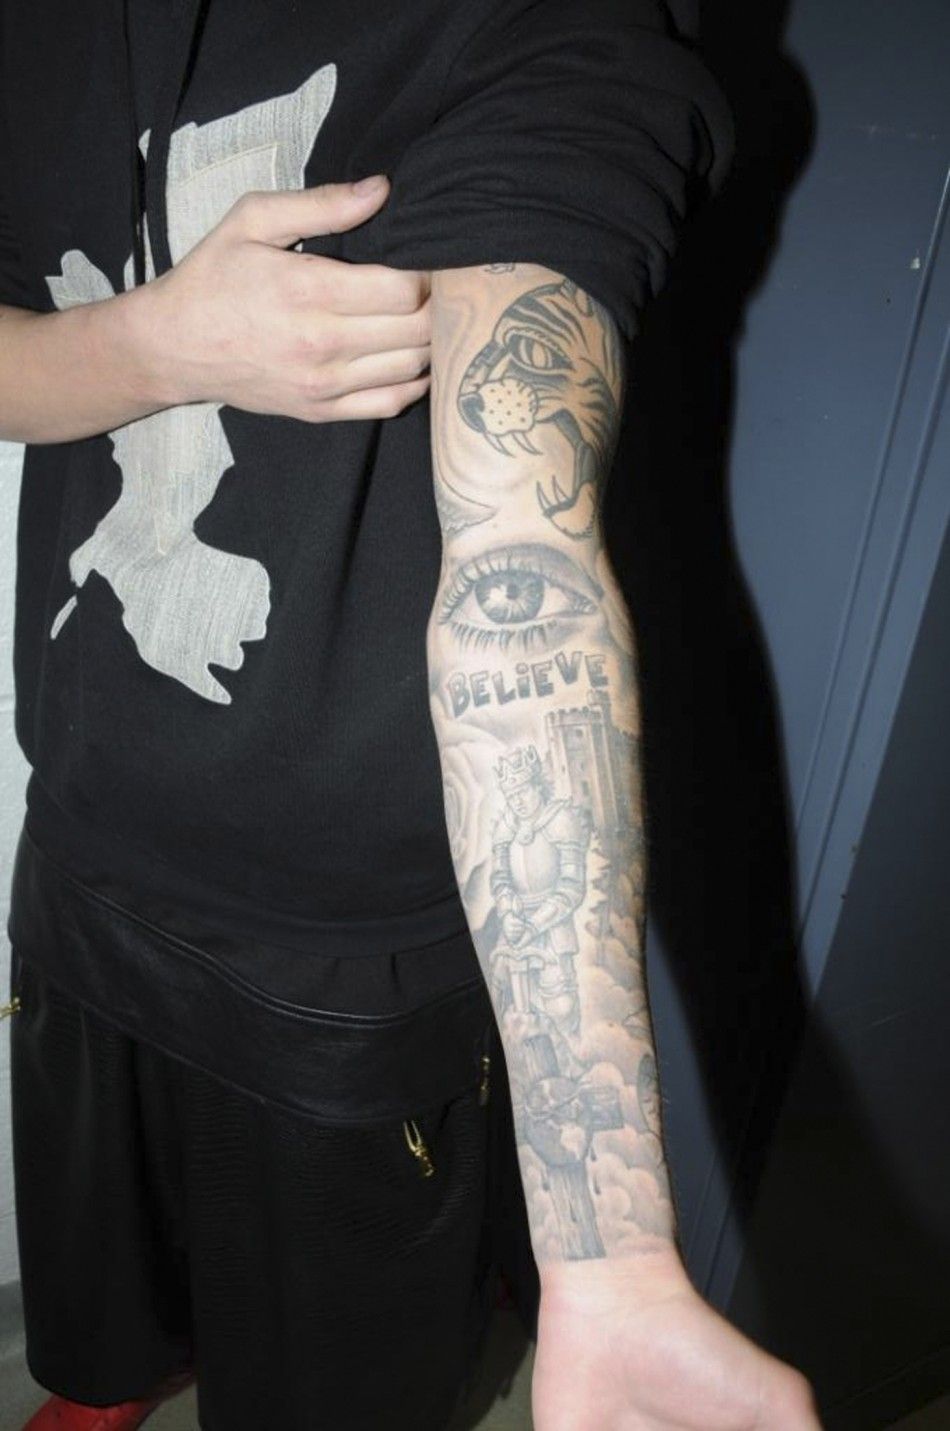 A tattoo is seen on the left arm of Canadian pop singer Justin Bieber, while in police custody in Miami Beach, Florida January 23, 2014 in this Miami Beach Police Department handout released to Reuters on March 4, 2014. Bieber was charged with driving und